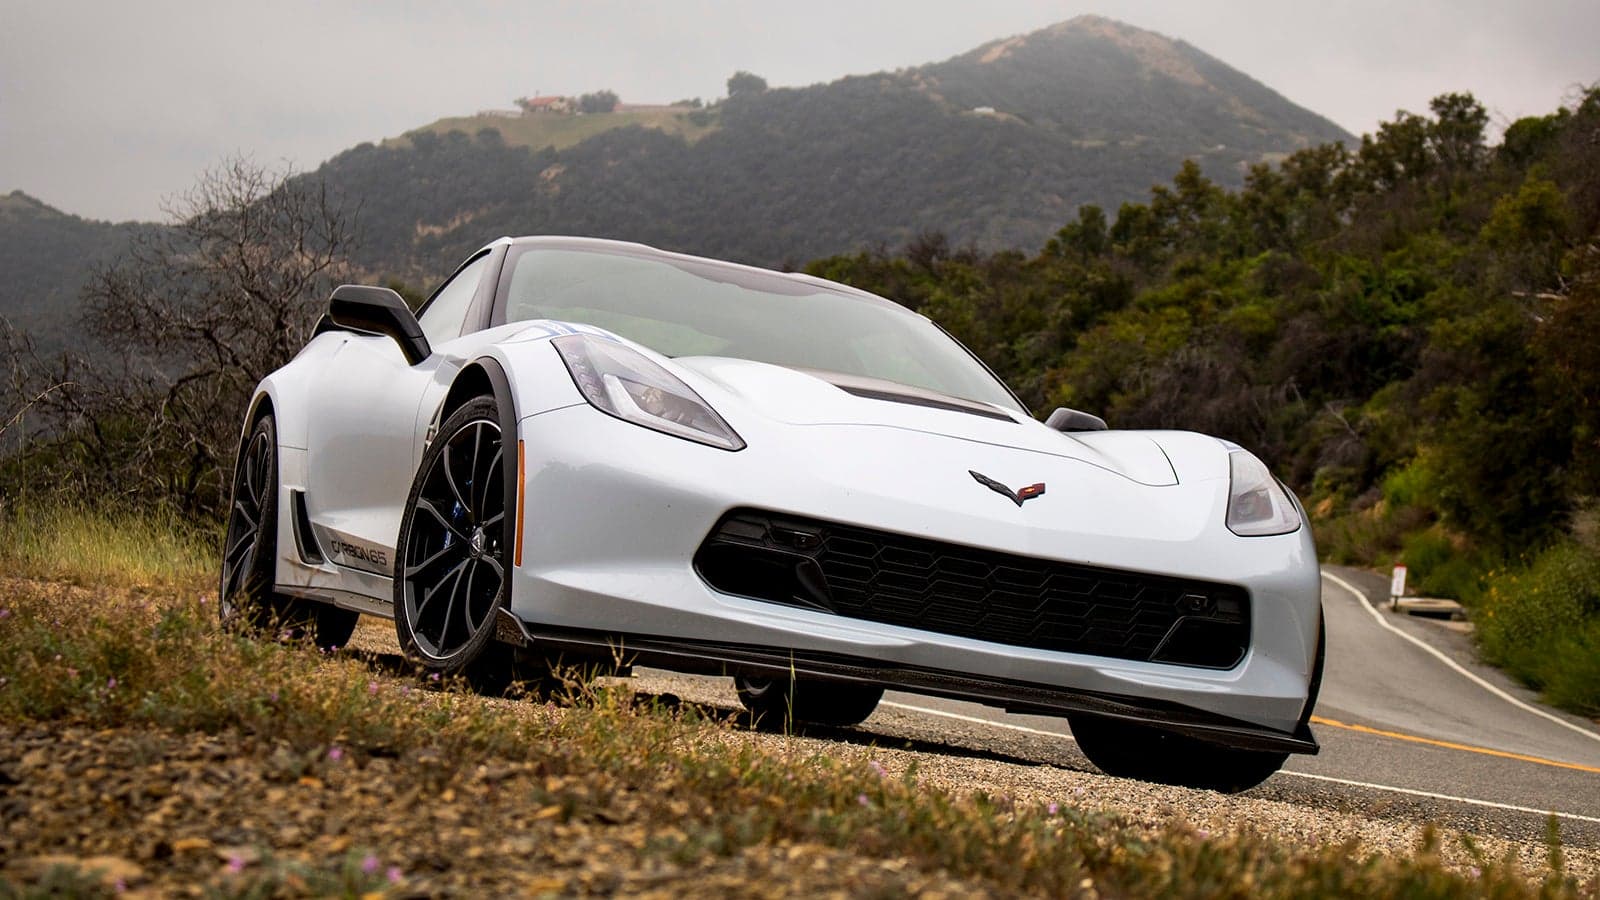 2018 Chevrolet Corvette Grand Sport Carbon 65 Edition Review: Into the Clouds In a $100,000 ‘Vette